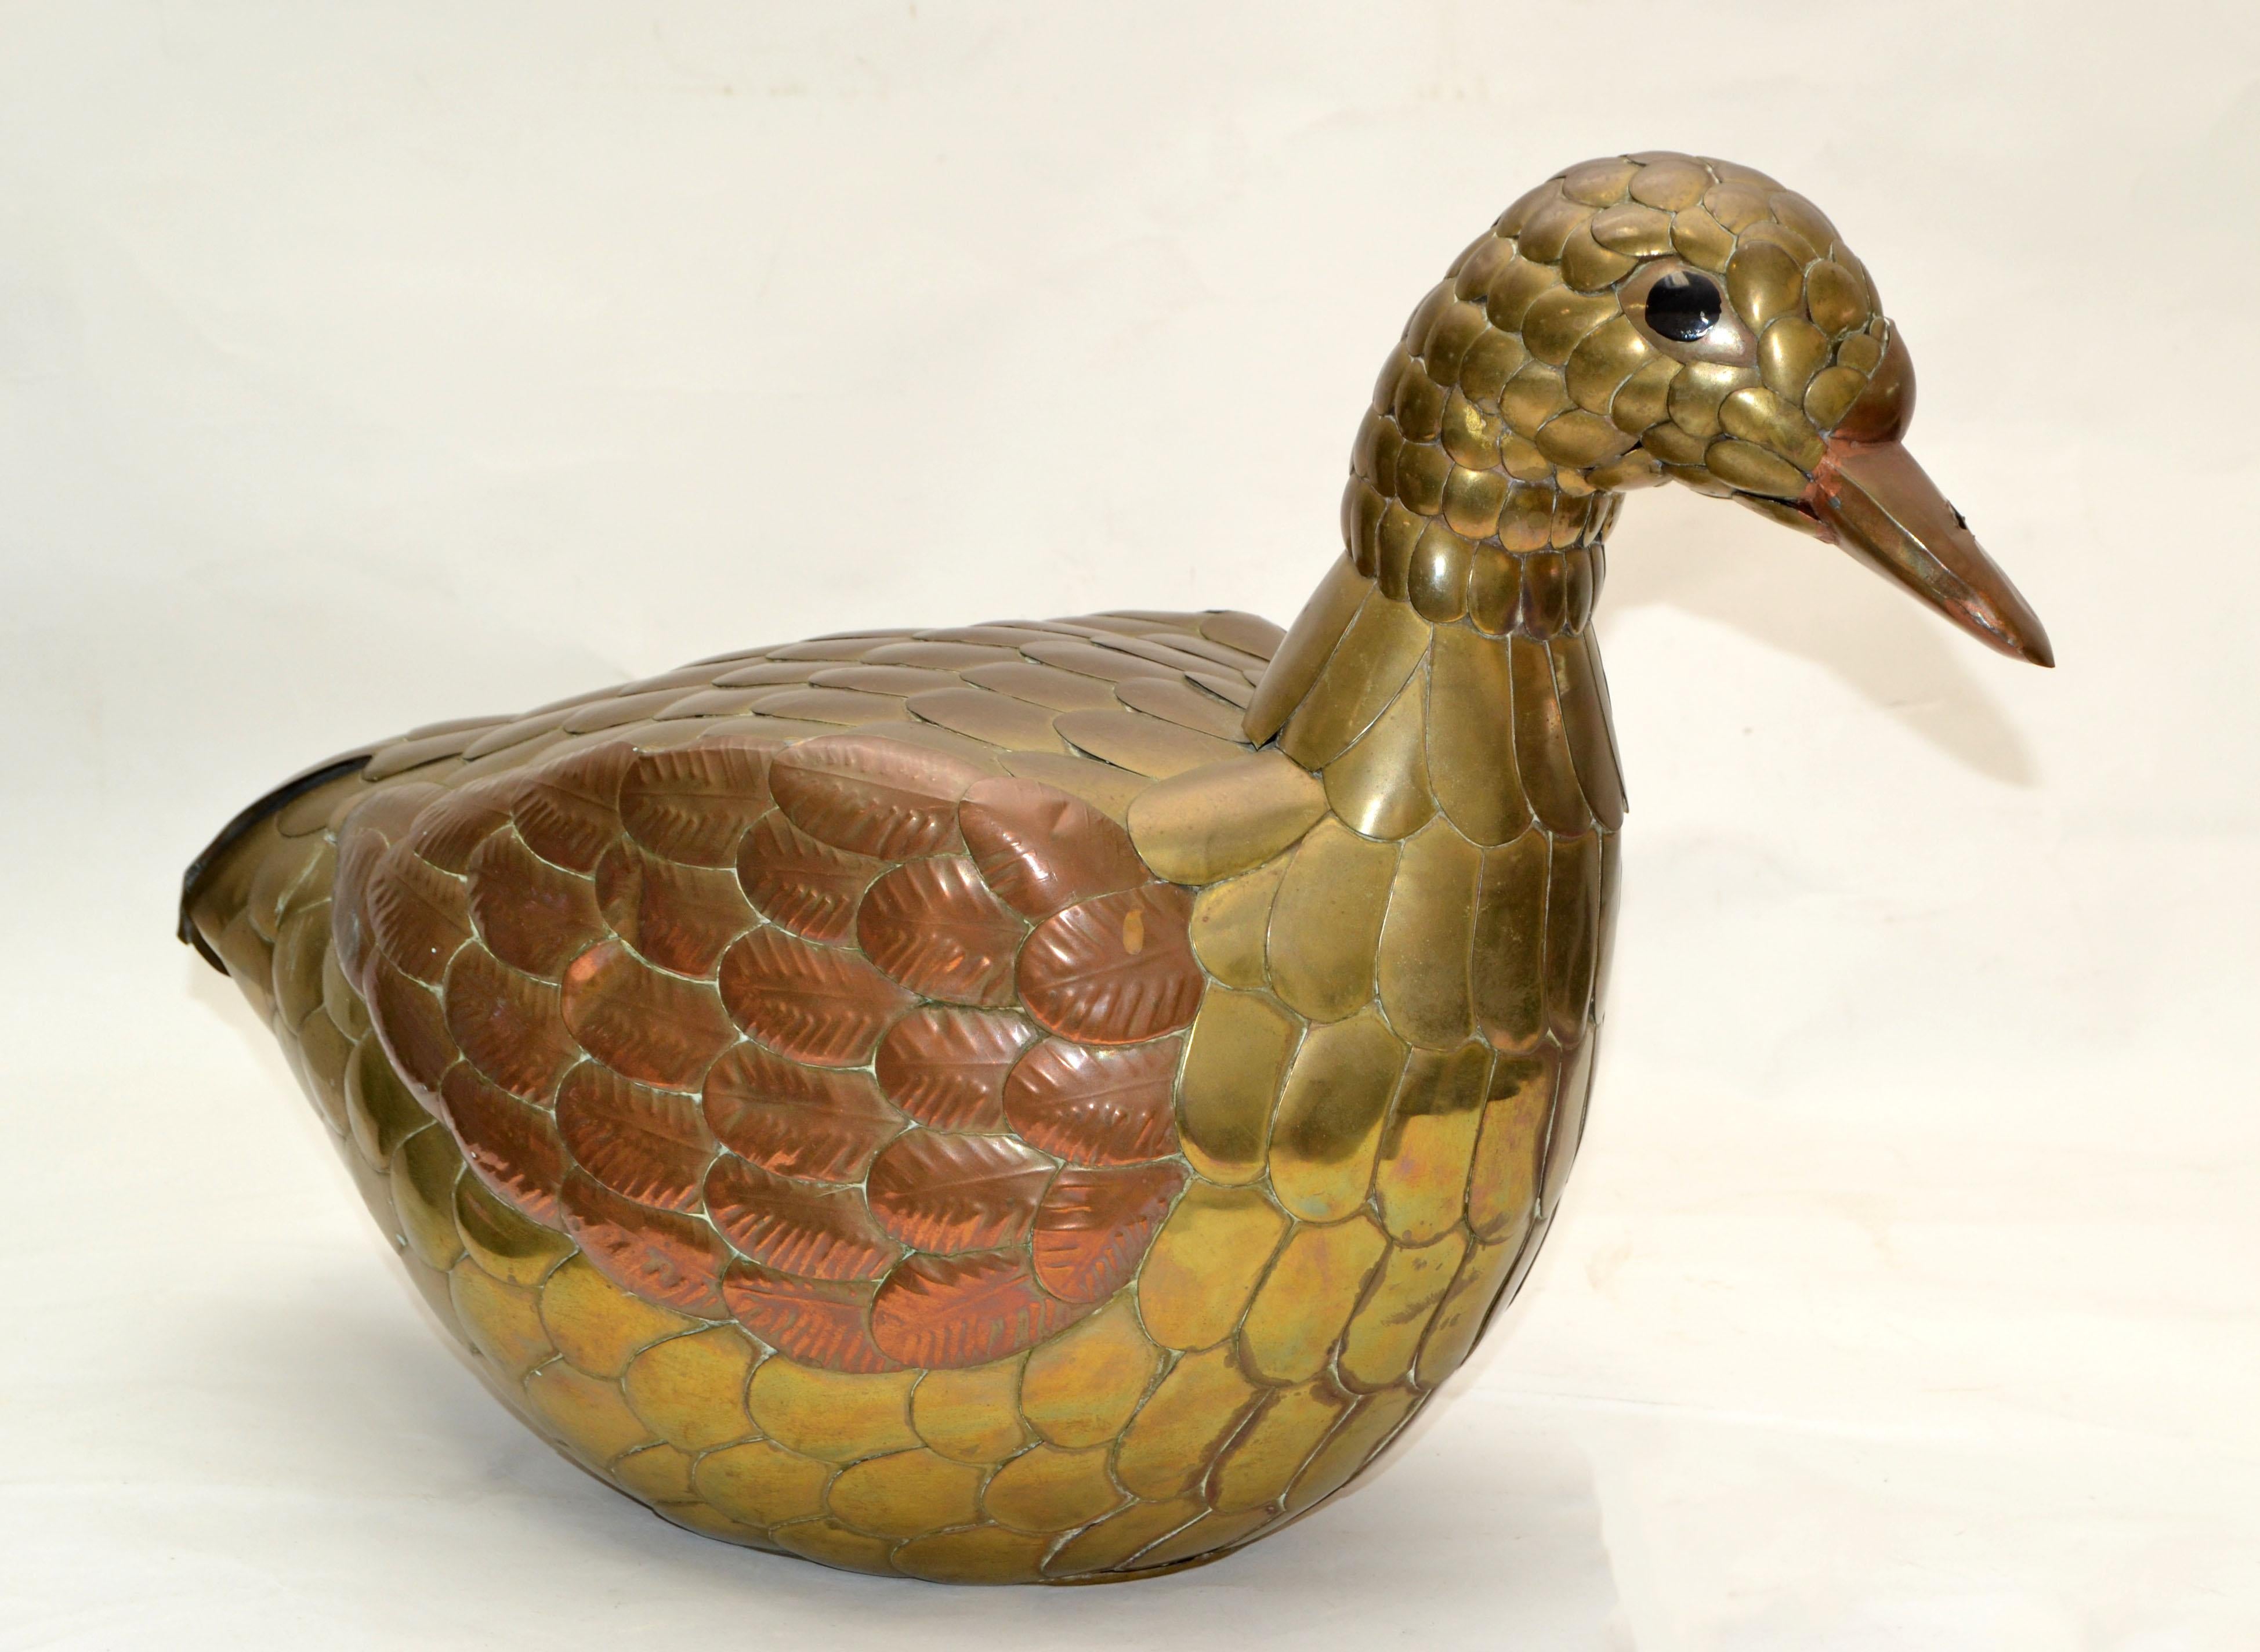 Metal Art Brutalist style duck, animal sculpture in brass and tin by Sergio Bustamante.
Made in Mexico in the Mid-Century Modern Period.
Stunner done and graceful in appearance.